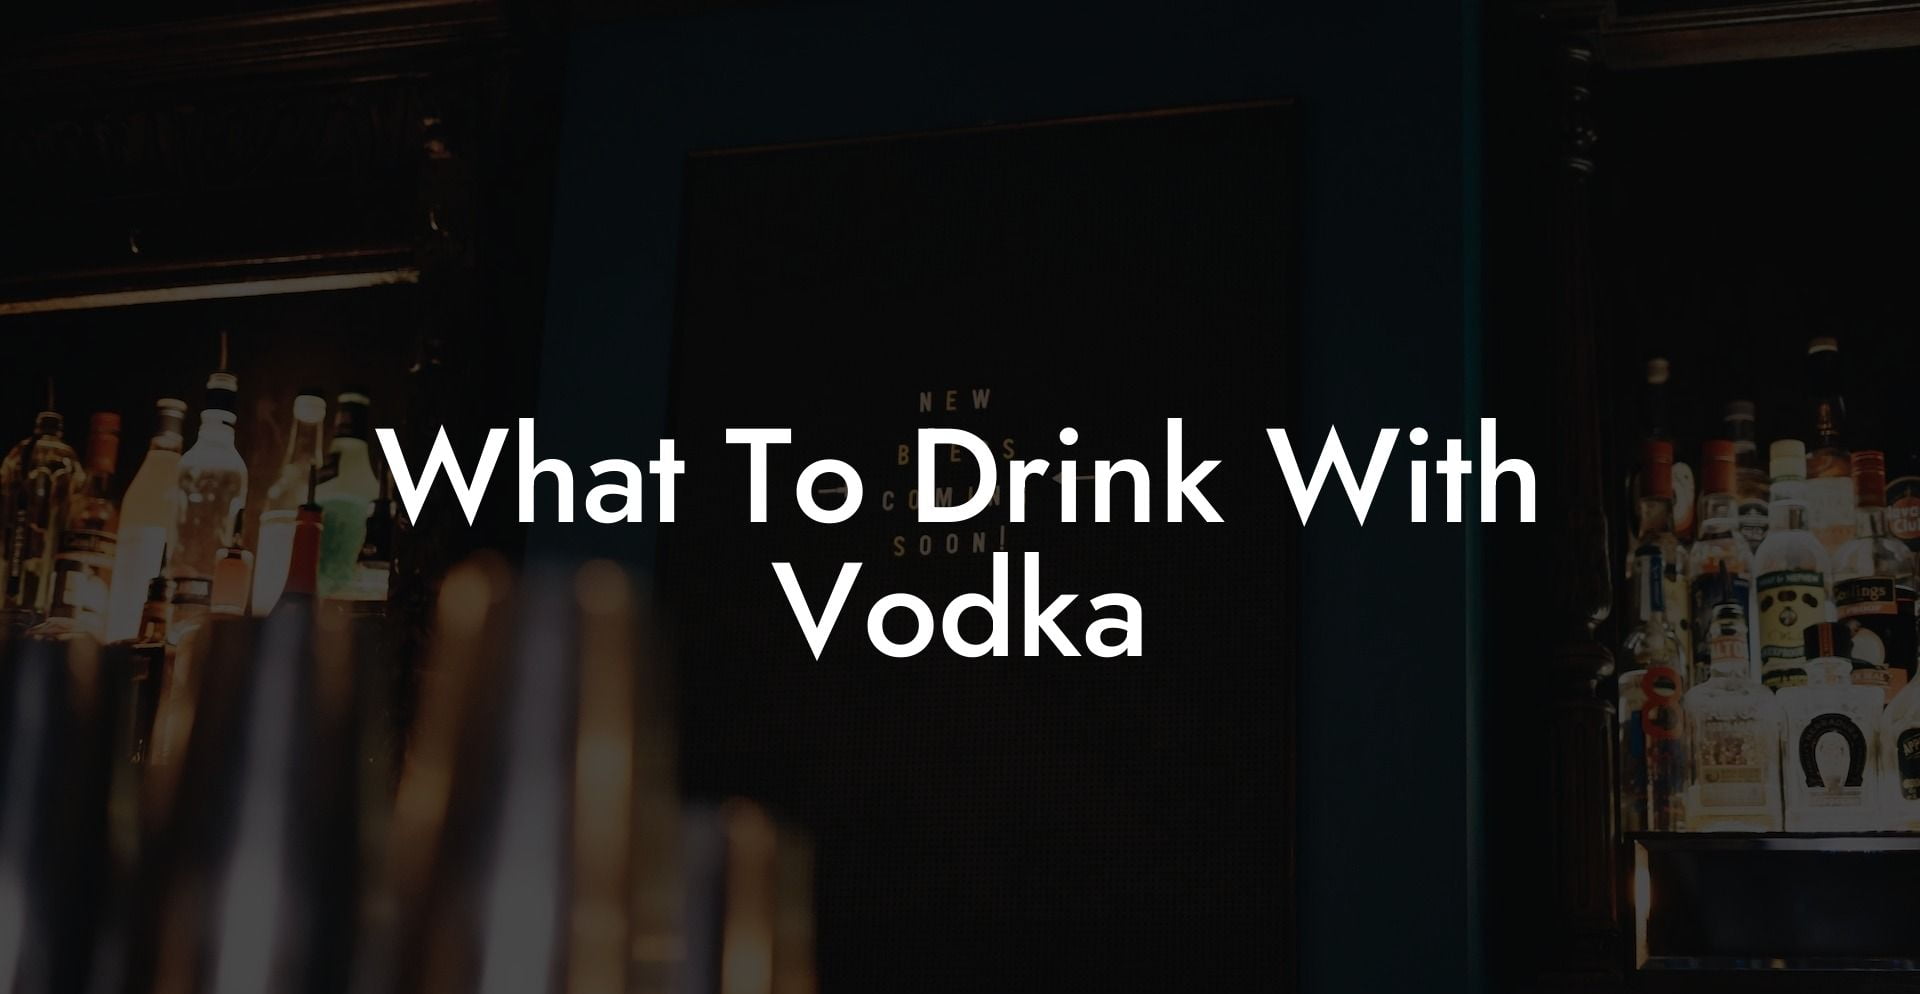 What To Drink With Vodka